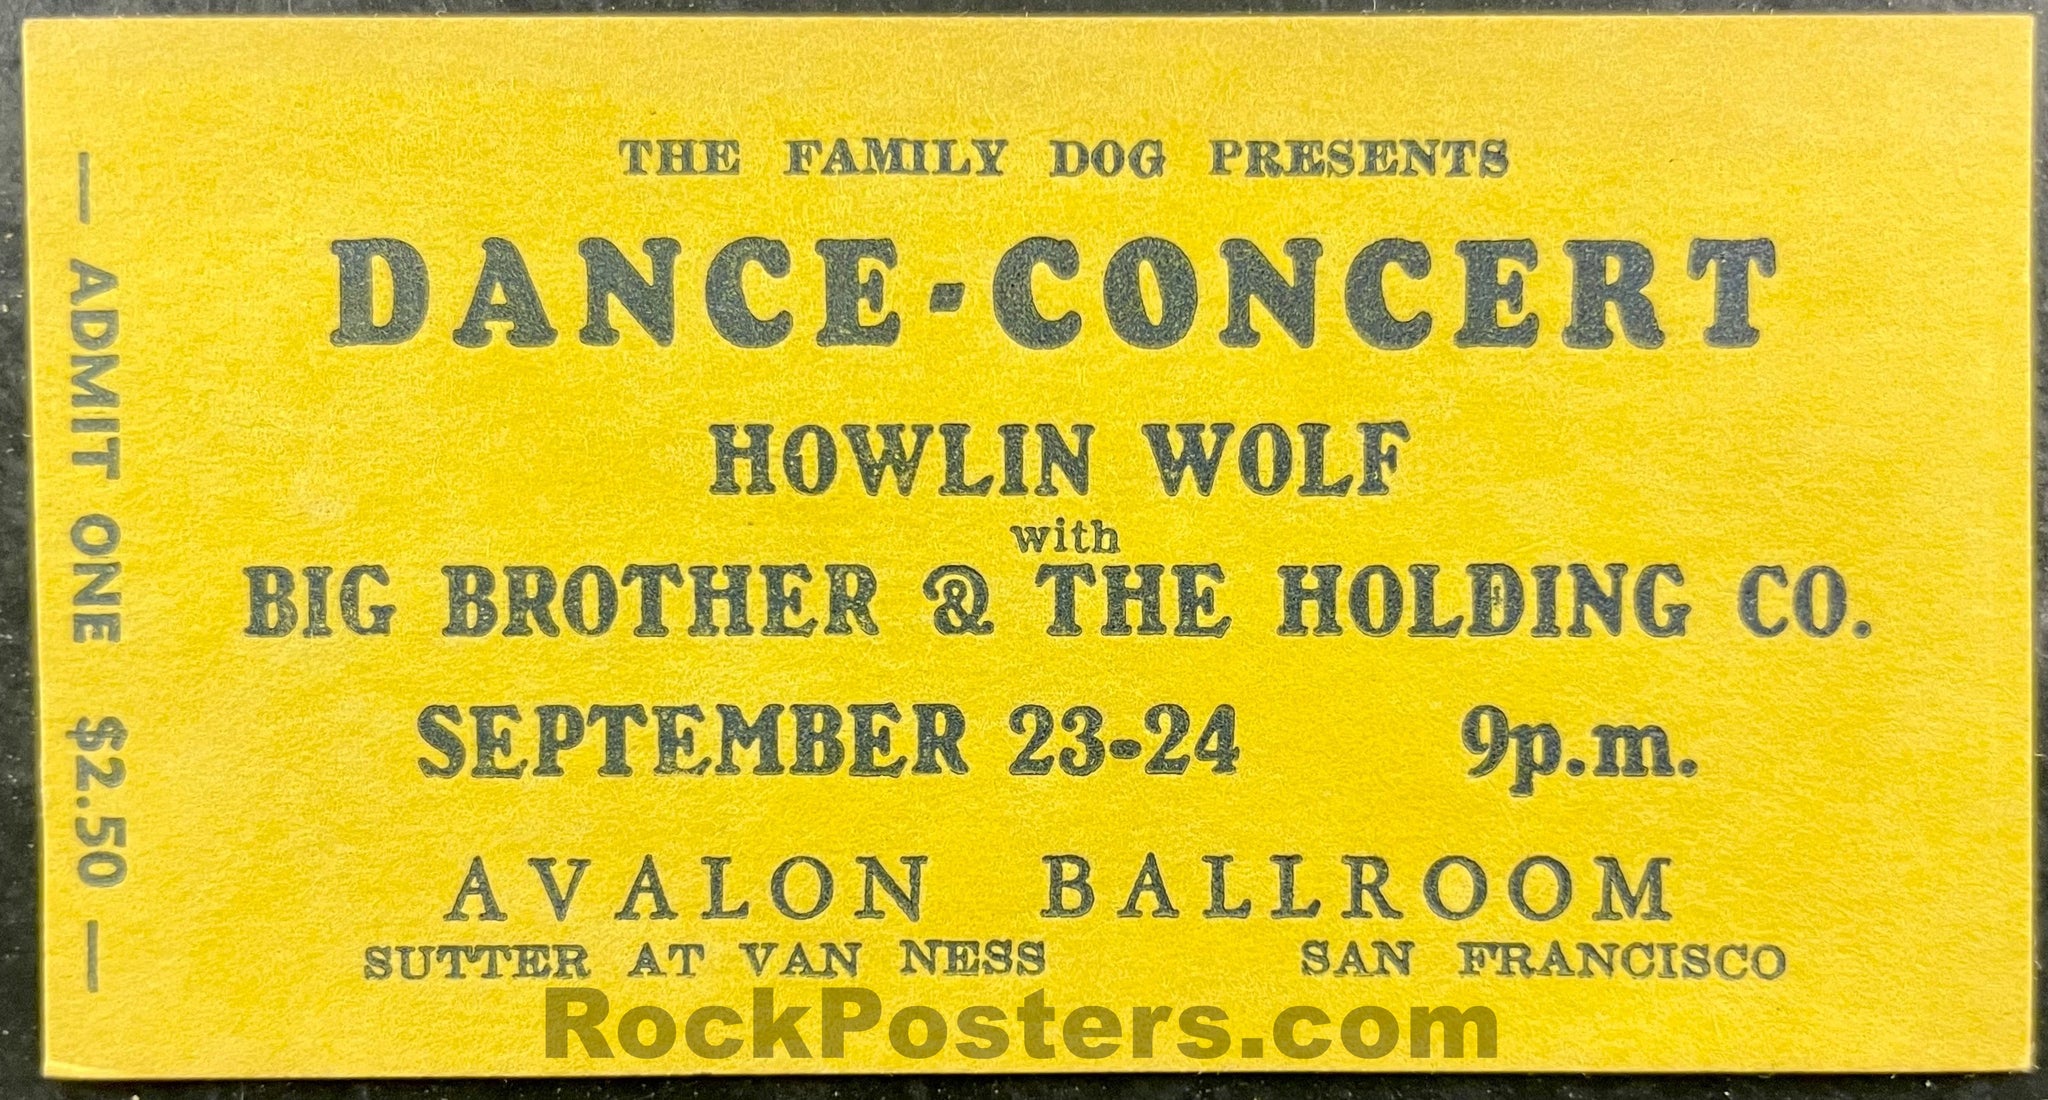 AUCTION - FD-27 - Big Brother Janis - Howlin' Wolf  - 1966 Unused Ticket - Near Mint